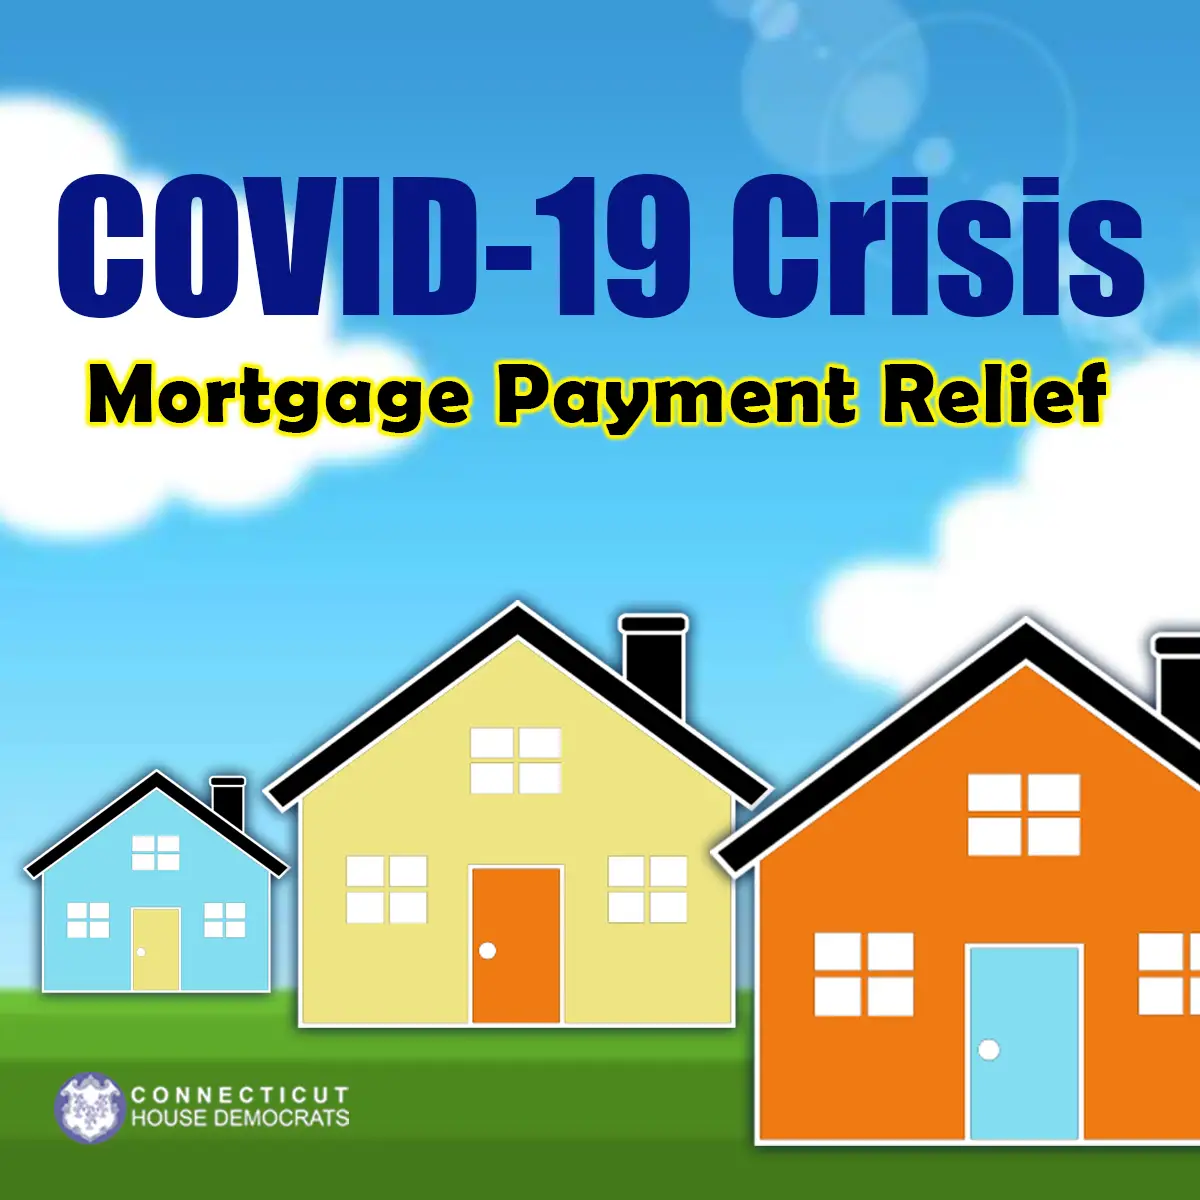 Mortgage Payment Relief During COVID